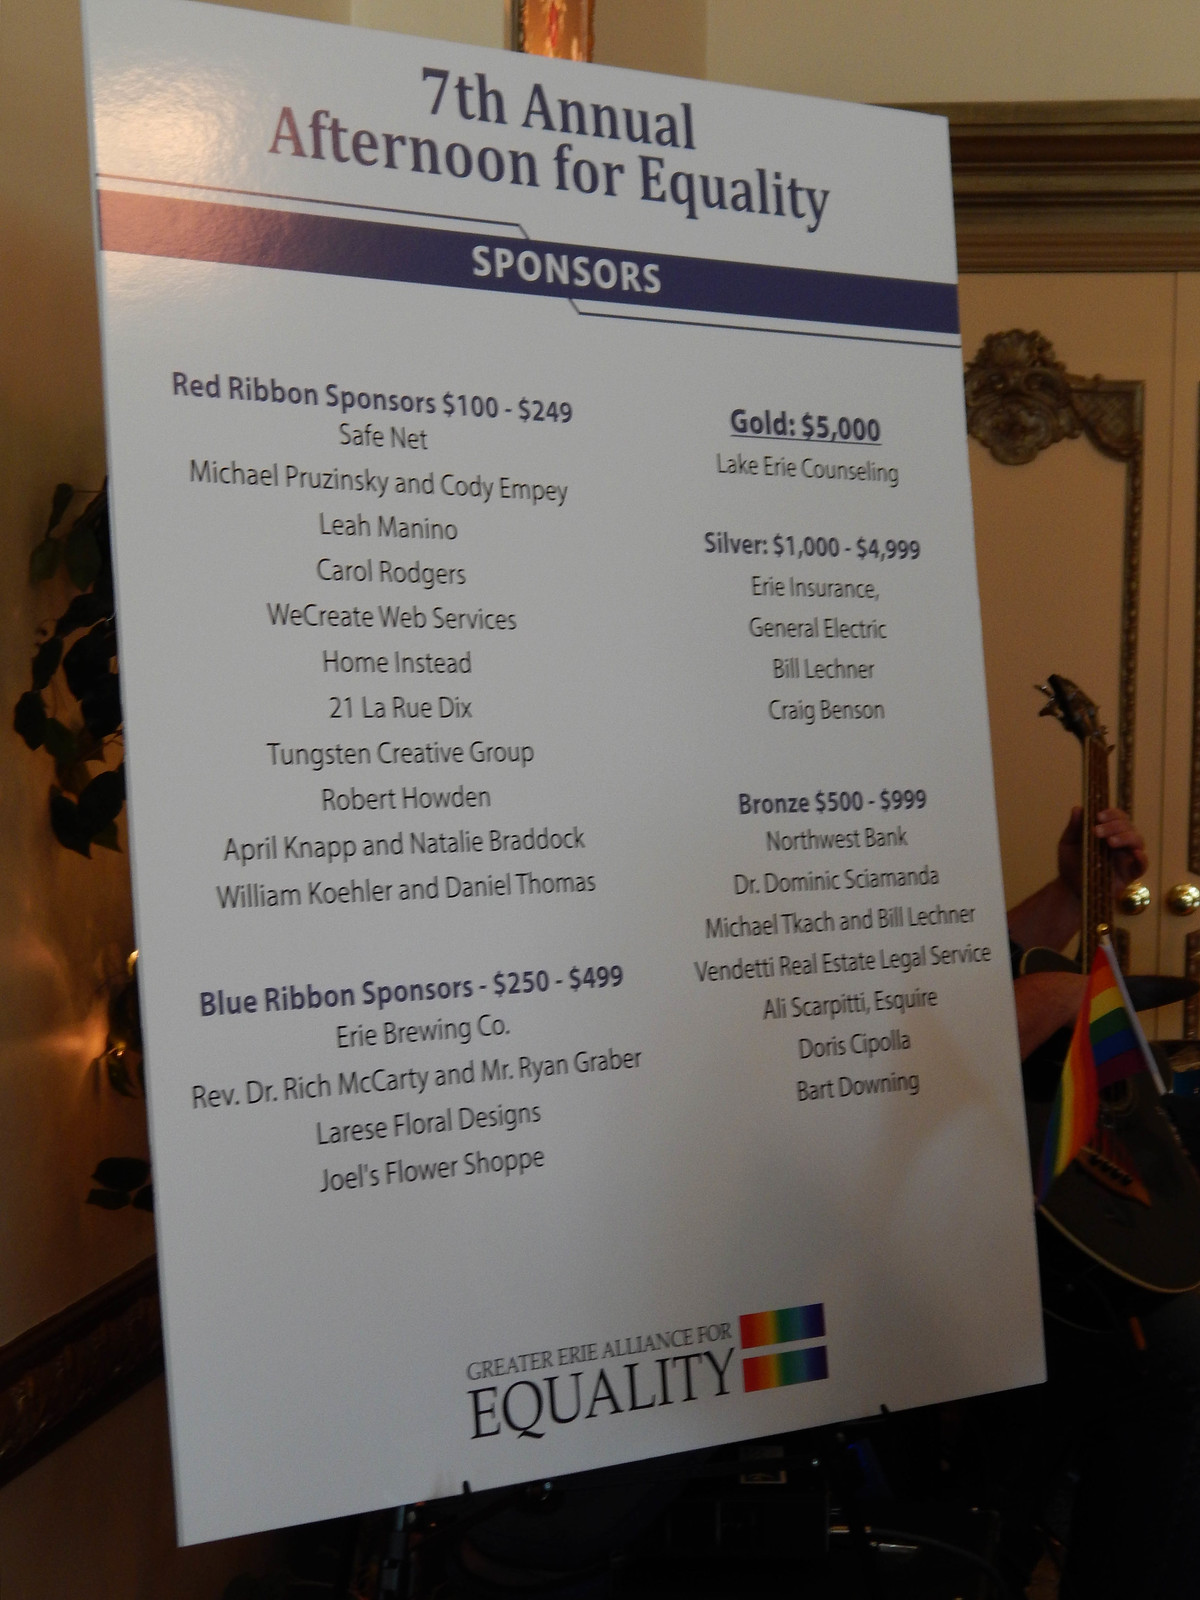 Sponsors for 7th Annual Afternoon for Equality